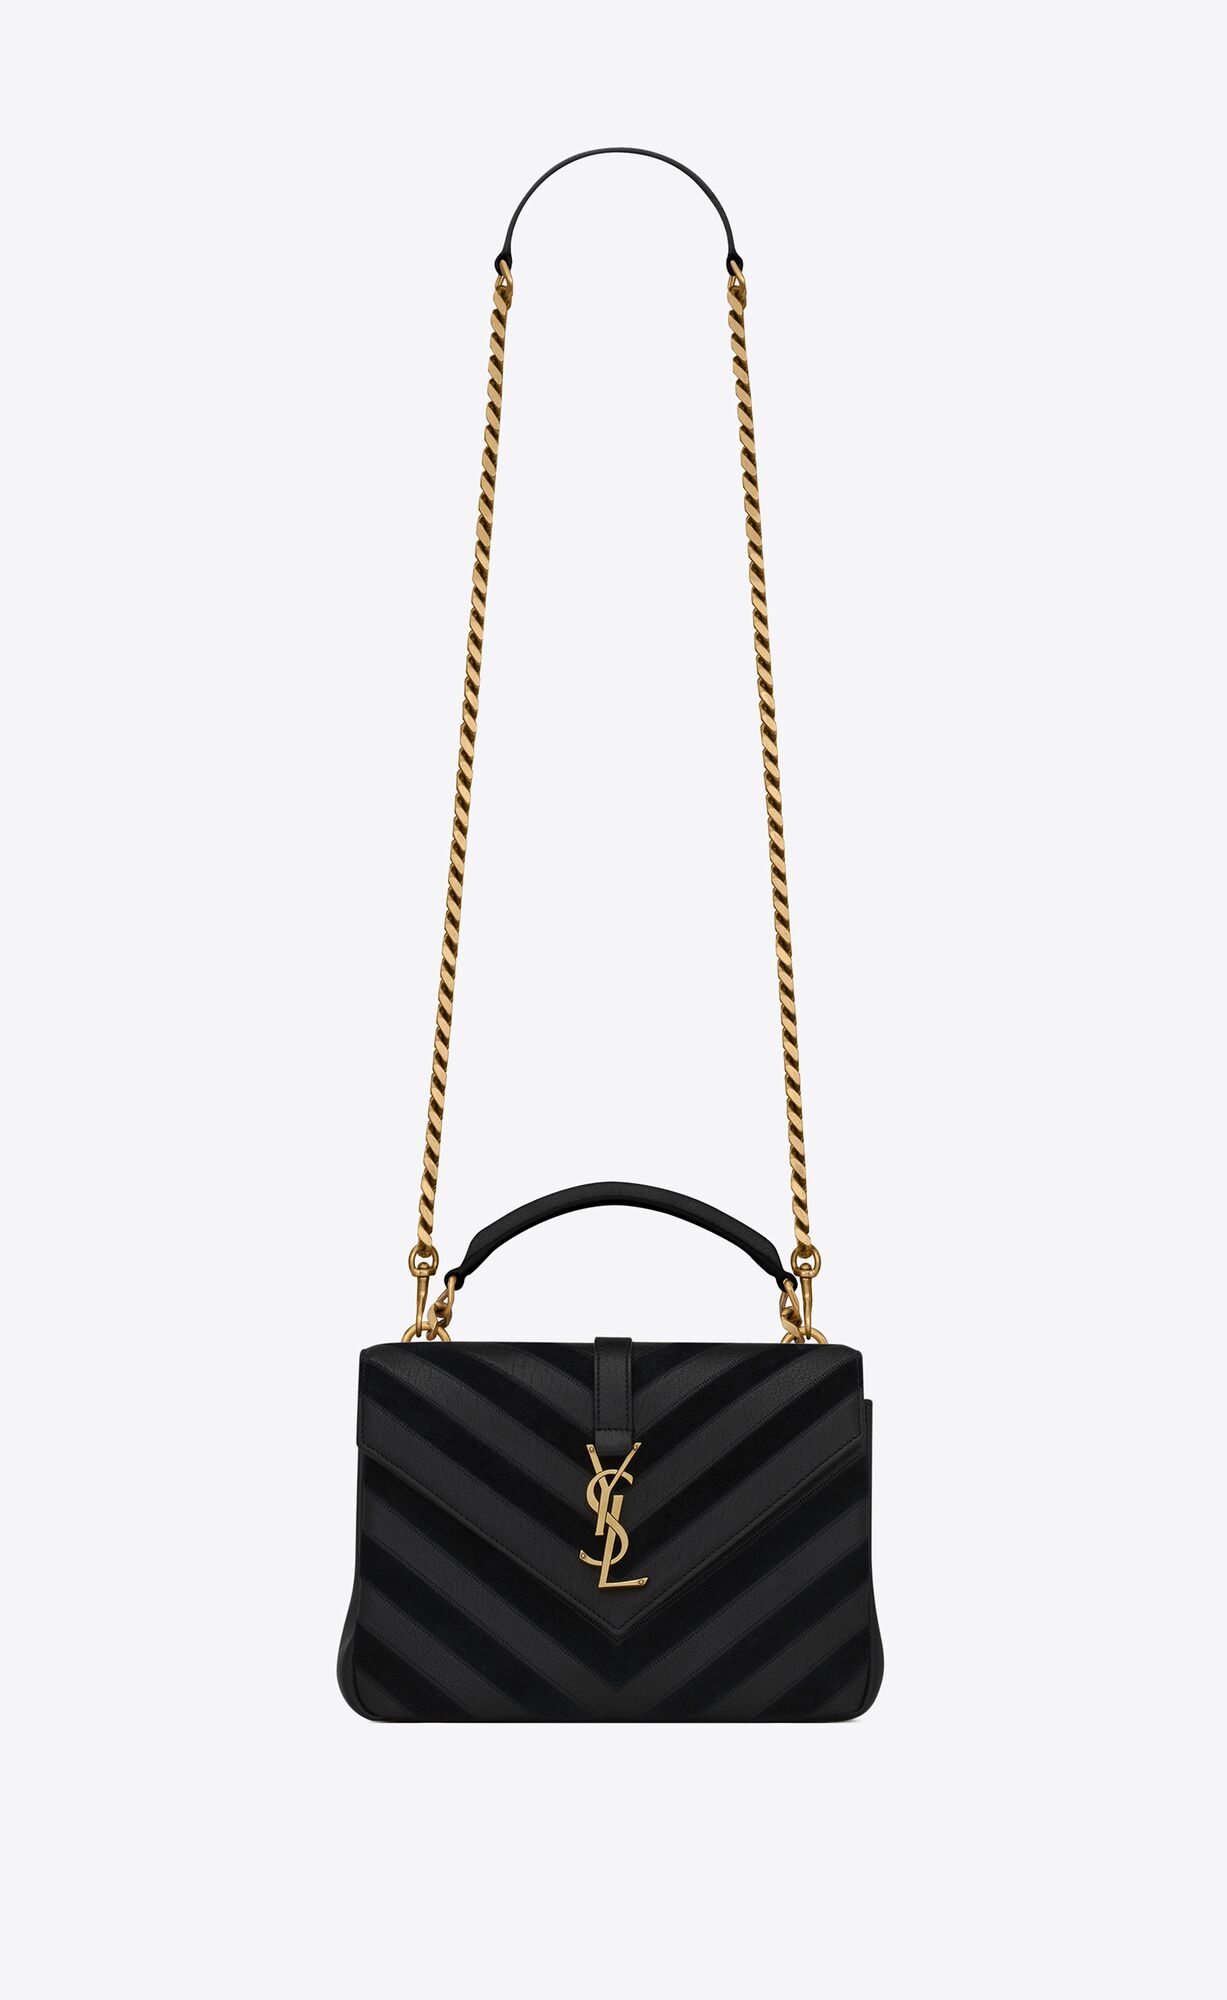 Saint Laurent College Medium Chain Bag In Suede And Quilted Leather – Black – 6002790JJN71000